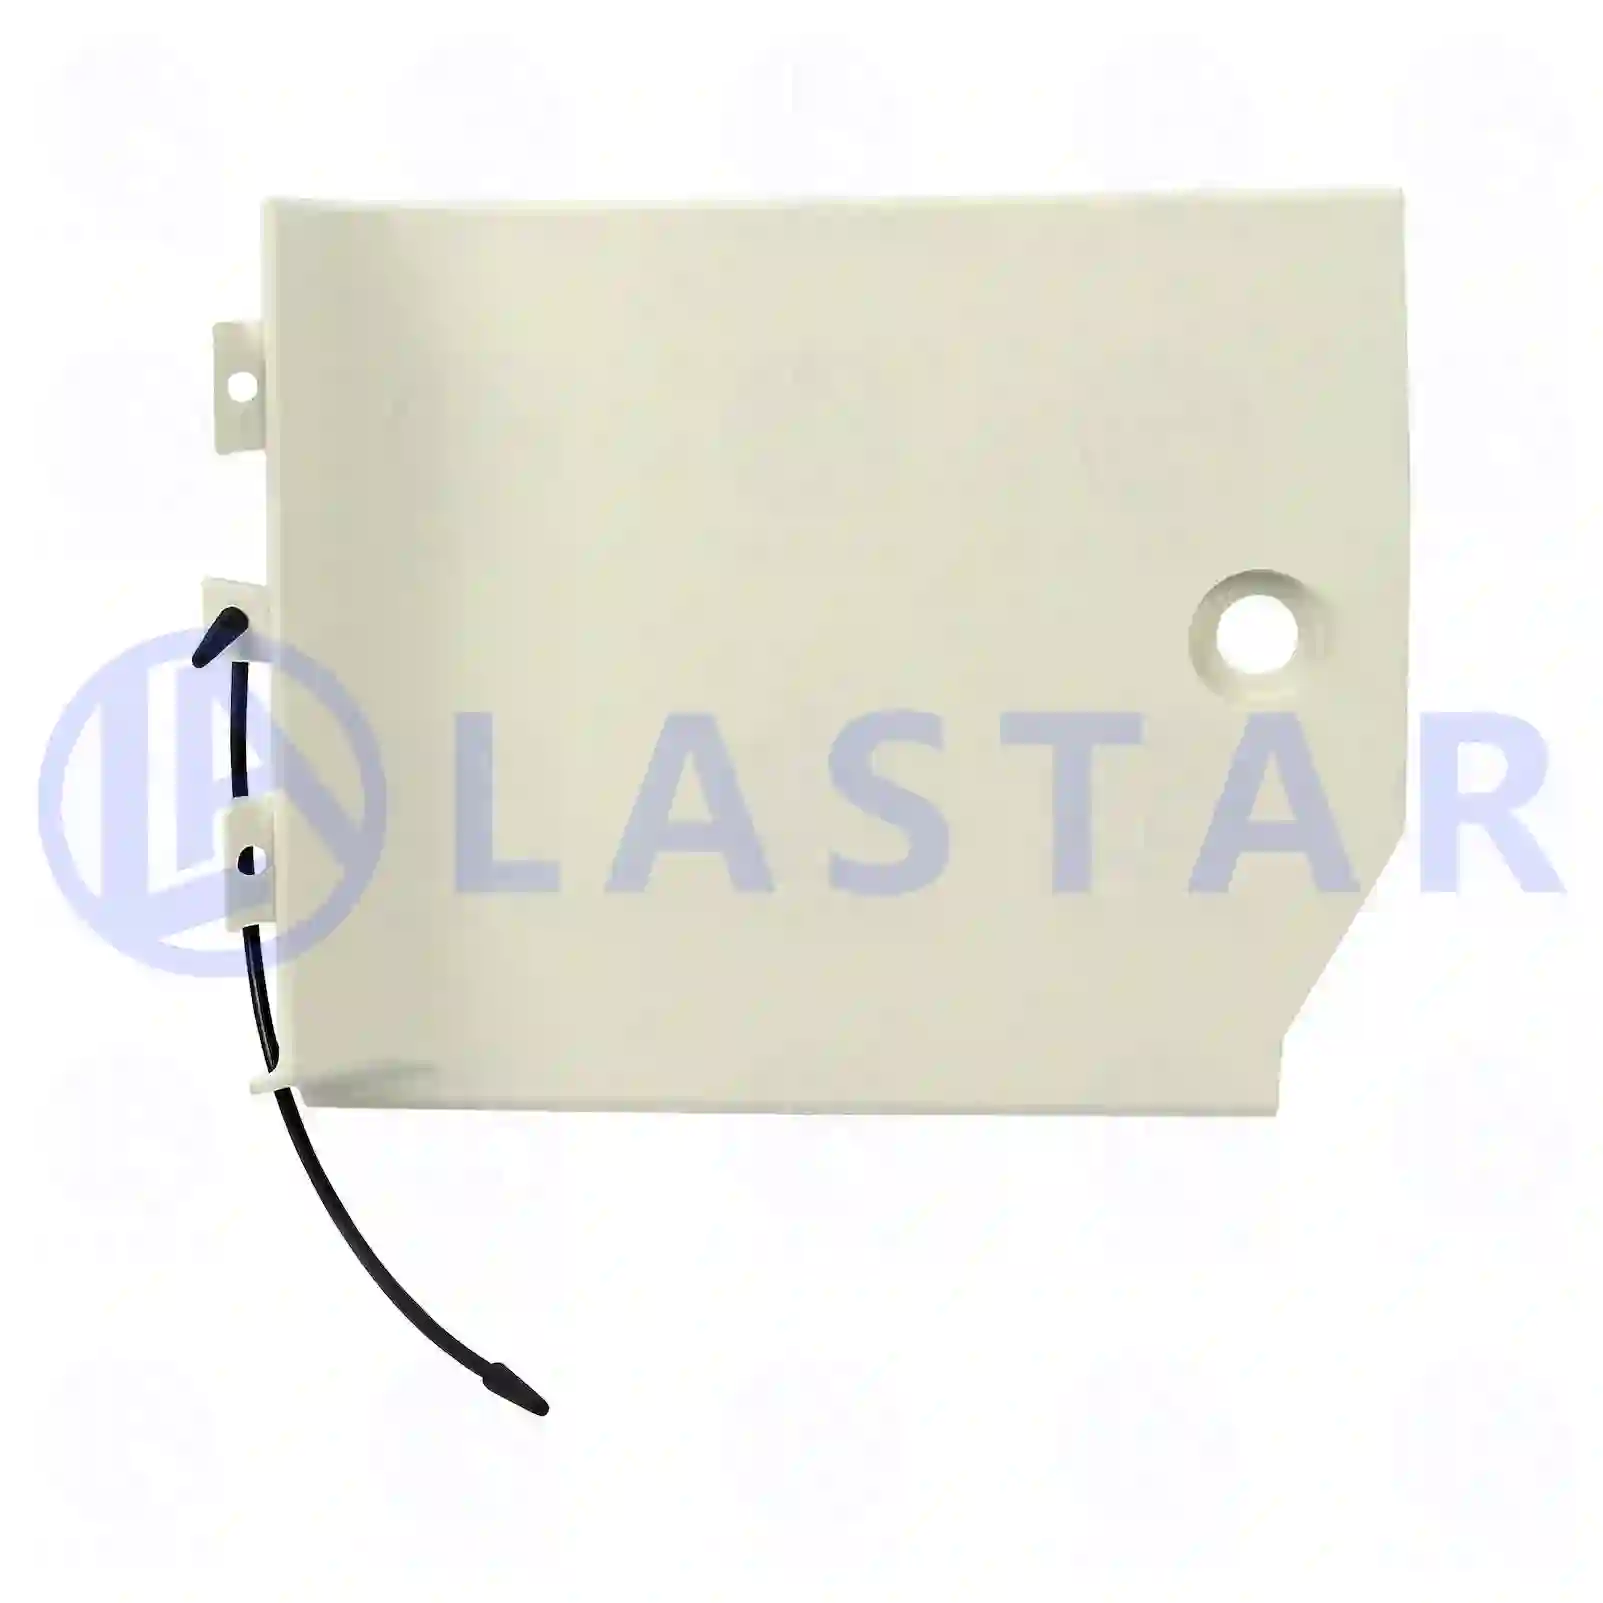 Cover, step well case, left, 77720055, 1828855 ||  77720055 Lastar Spare Part | Truck Spare Parts, Auotomotive Spare Parts Cover, step well case, left, 77720055, 1828855 ||  77720055 Lastar Spare Part | Truck Spare Parts, Auotomotive Spare Parts